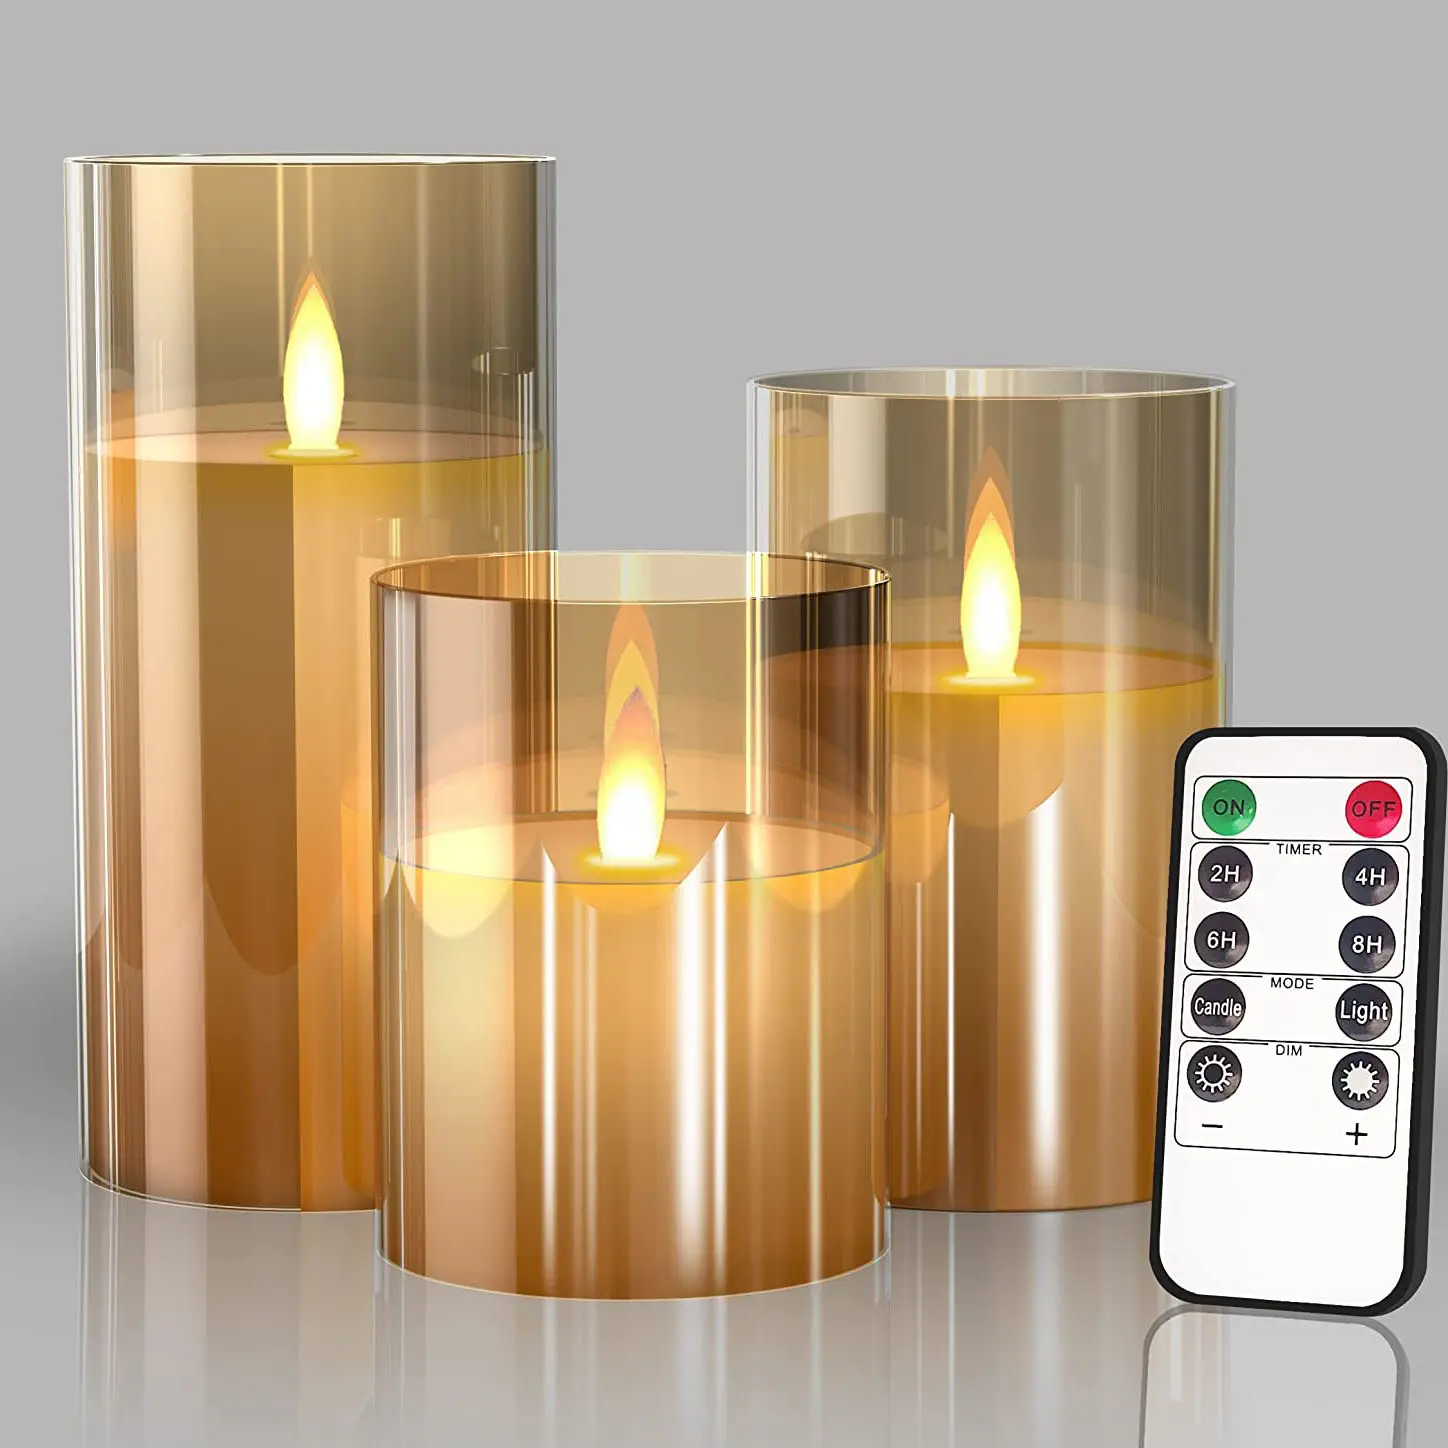 Fake bougie kerzen pillar real wax electric tea light battery operated candles velas led candle flameless candles with remote